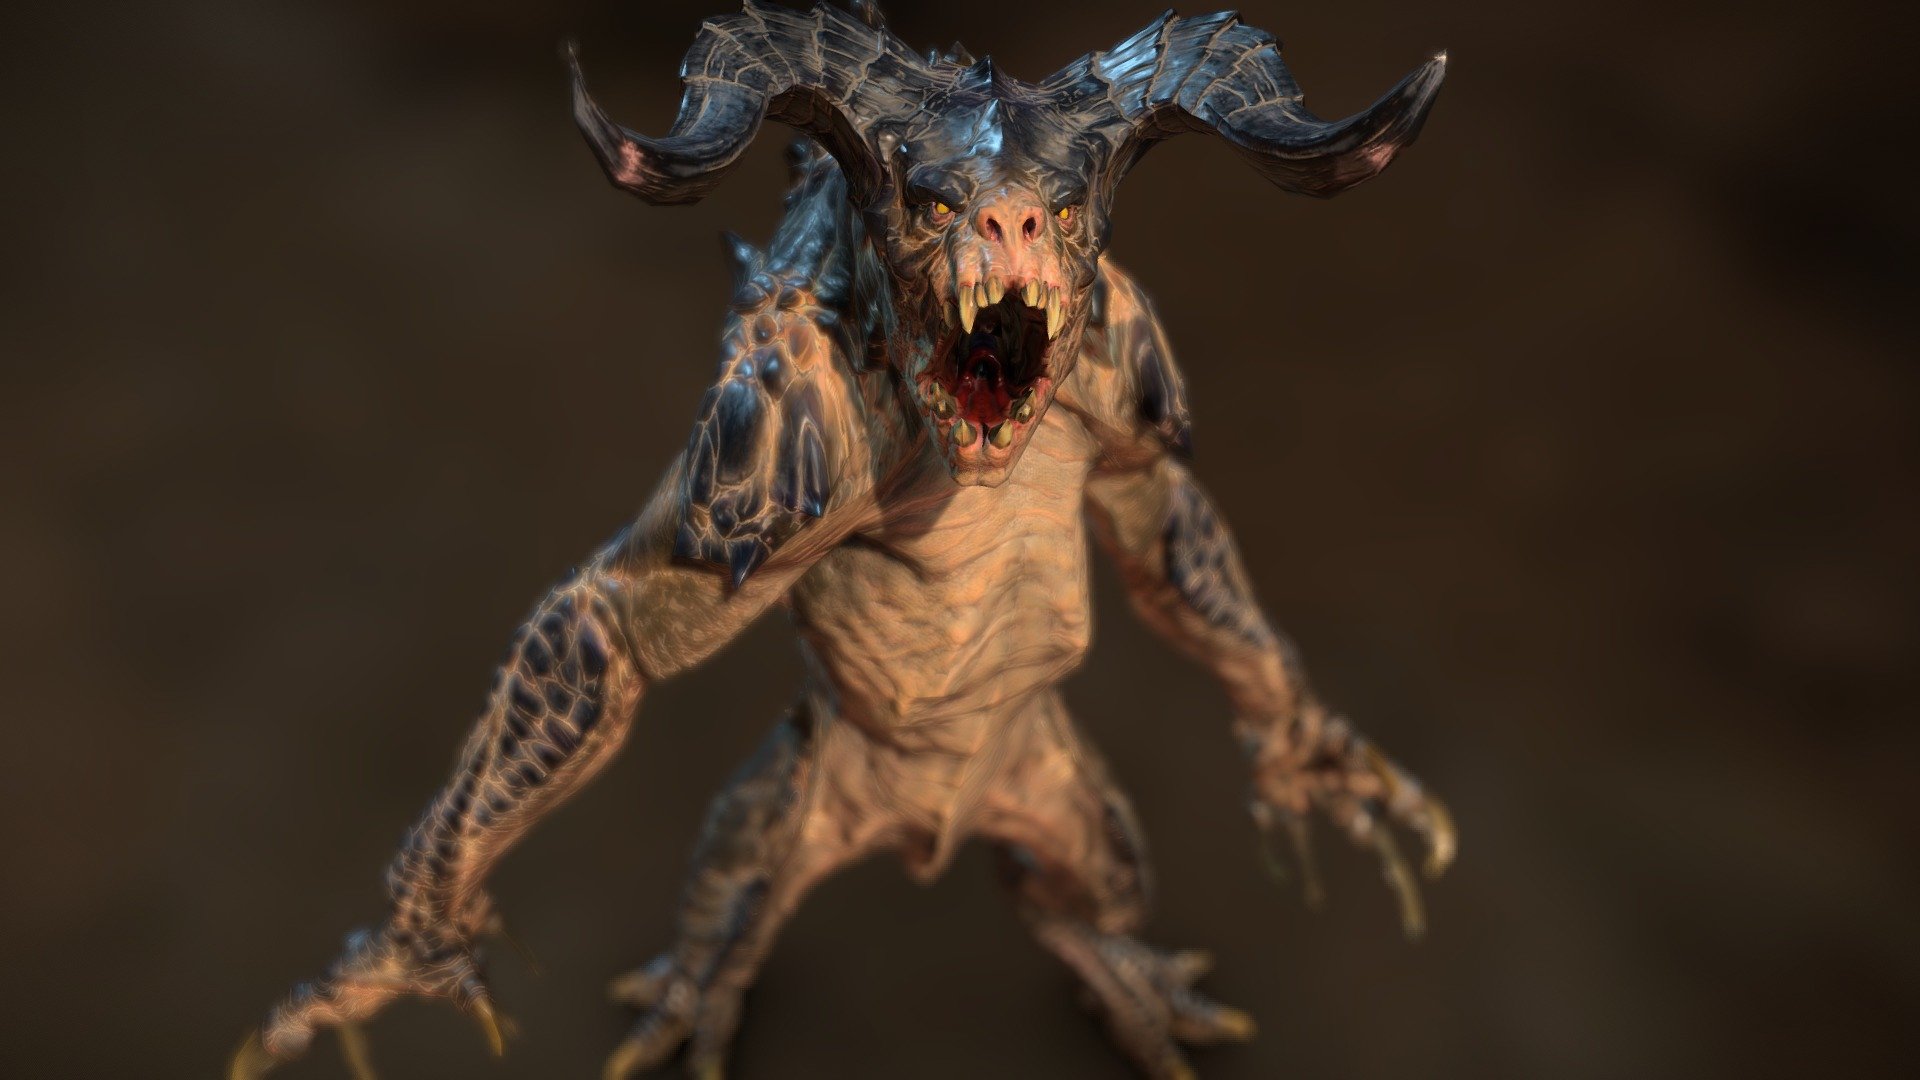 Deathclaw fallout 4 model